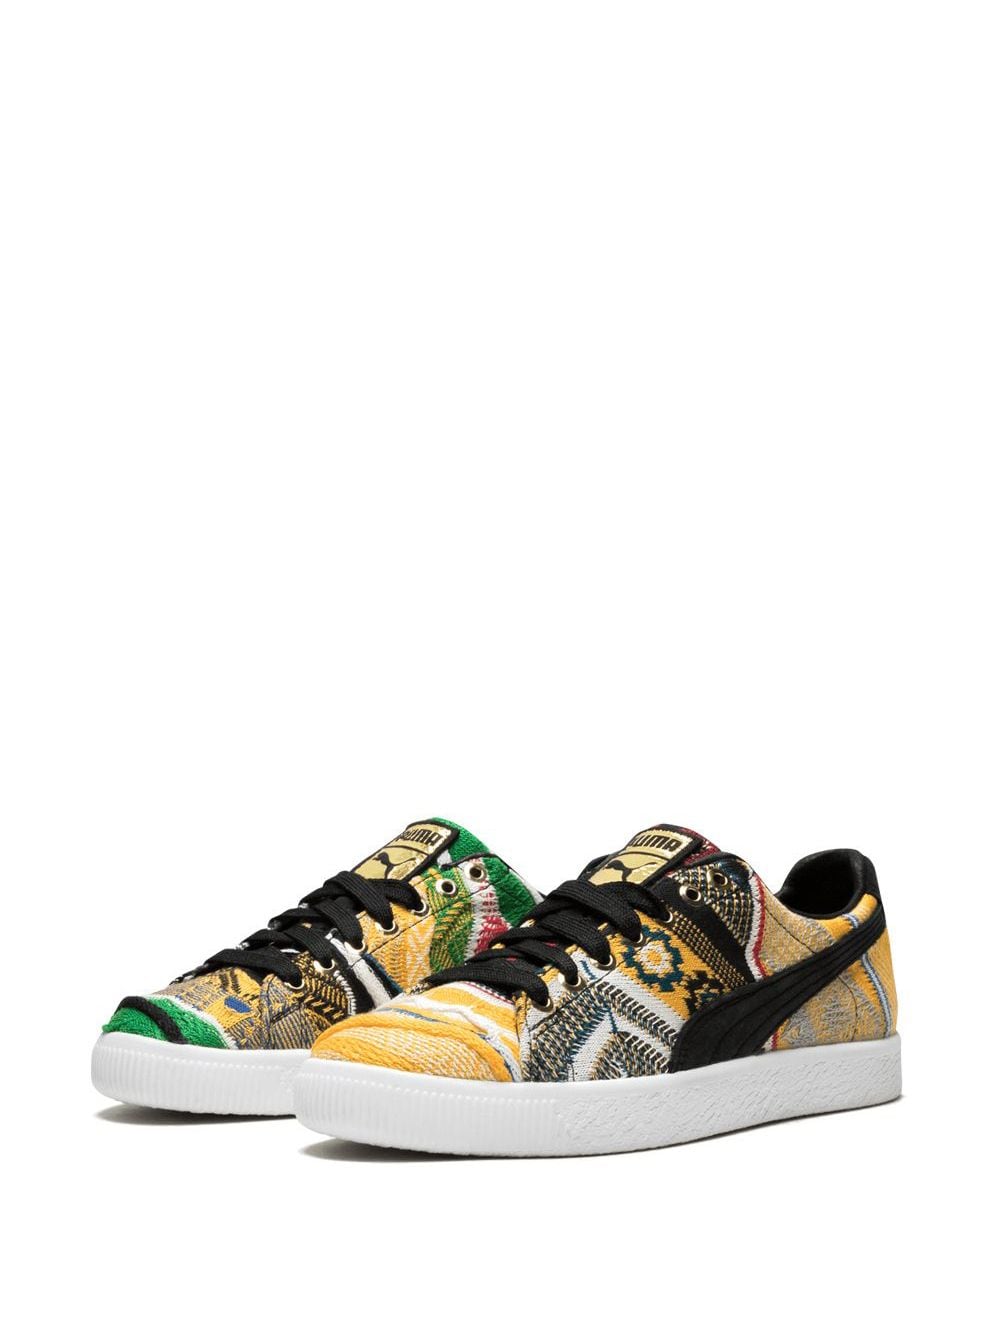 Image 2 of PUMA Clyde Coogi sneakers